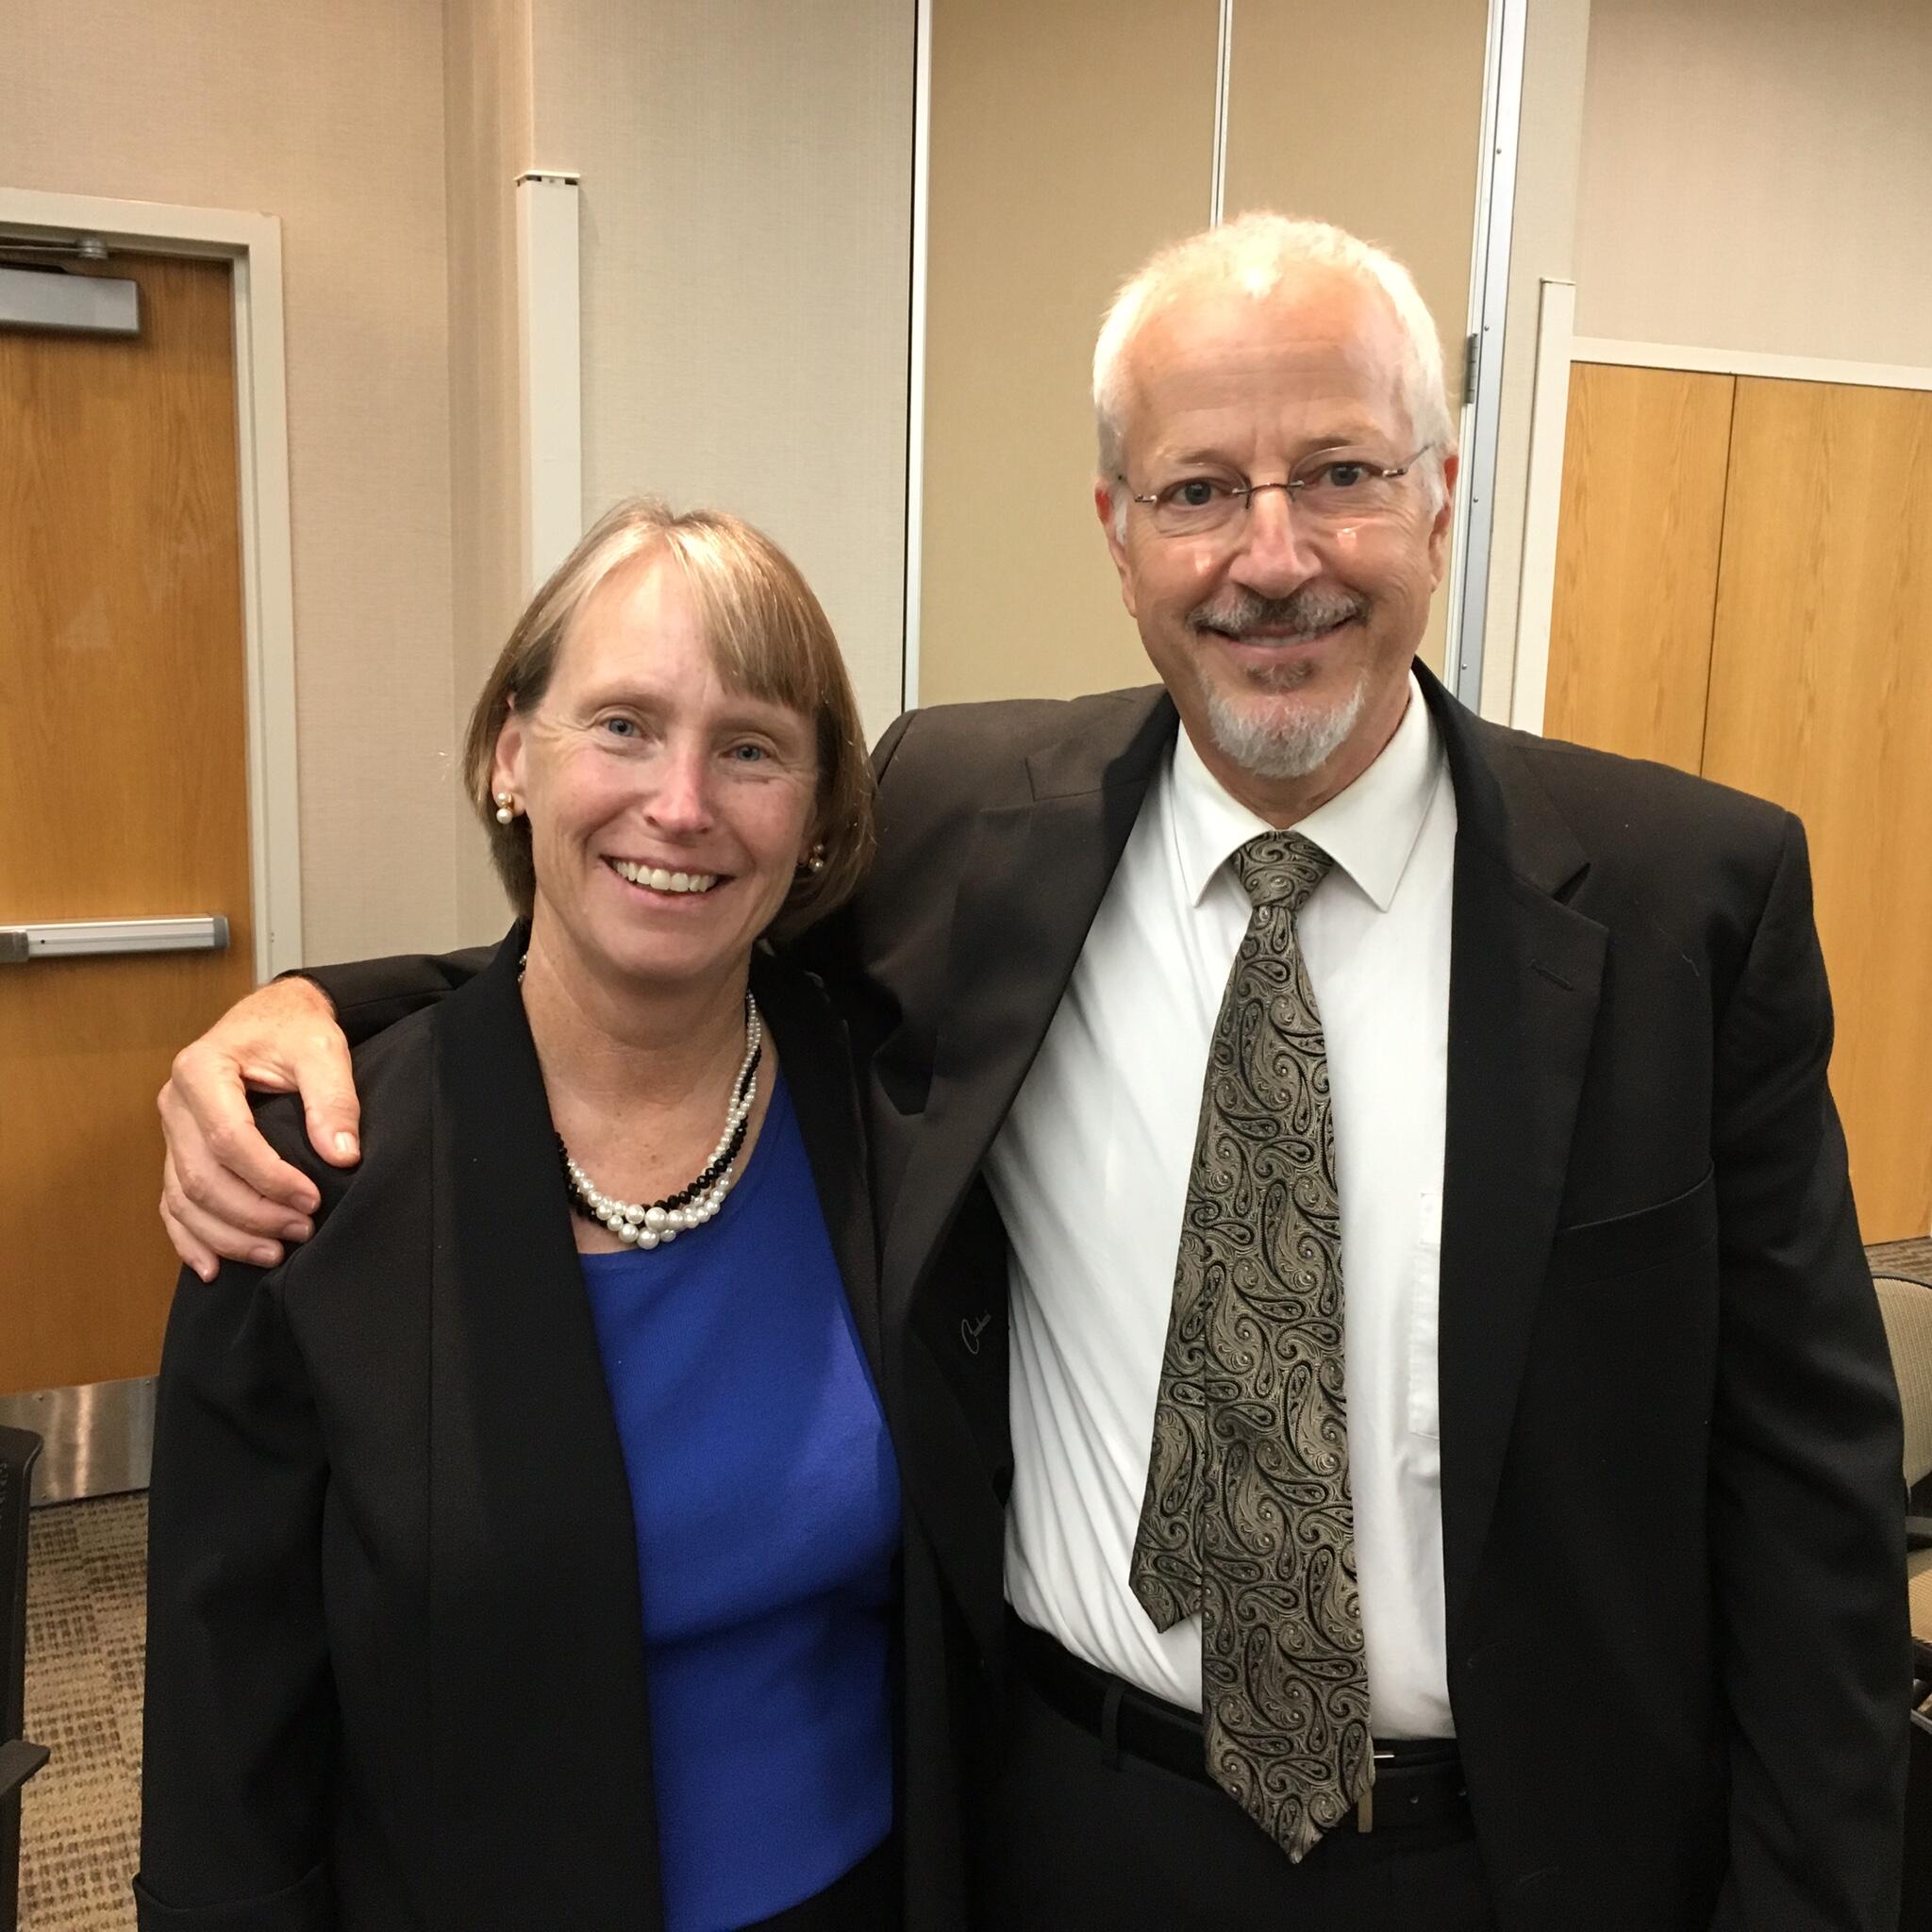 Kim Keith, MD, with Harry Kraus, MD